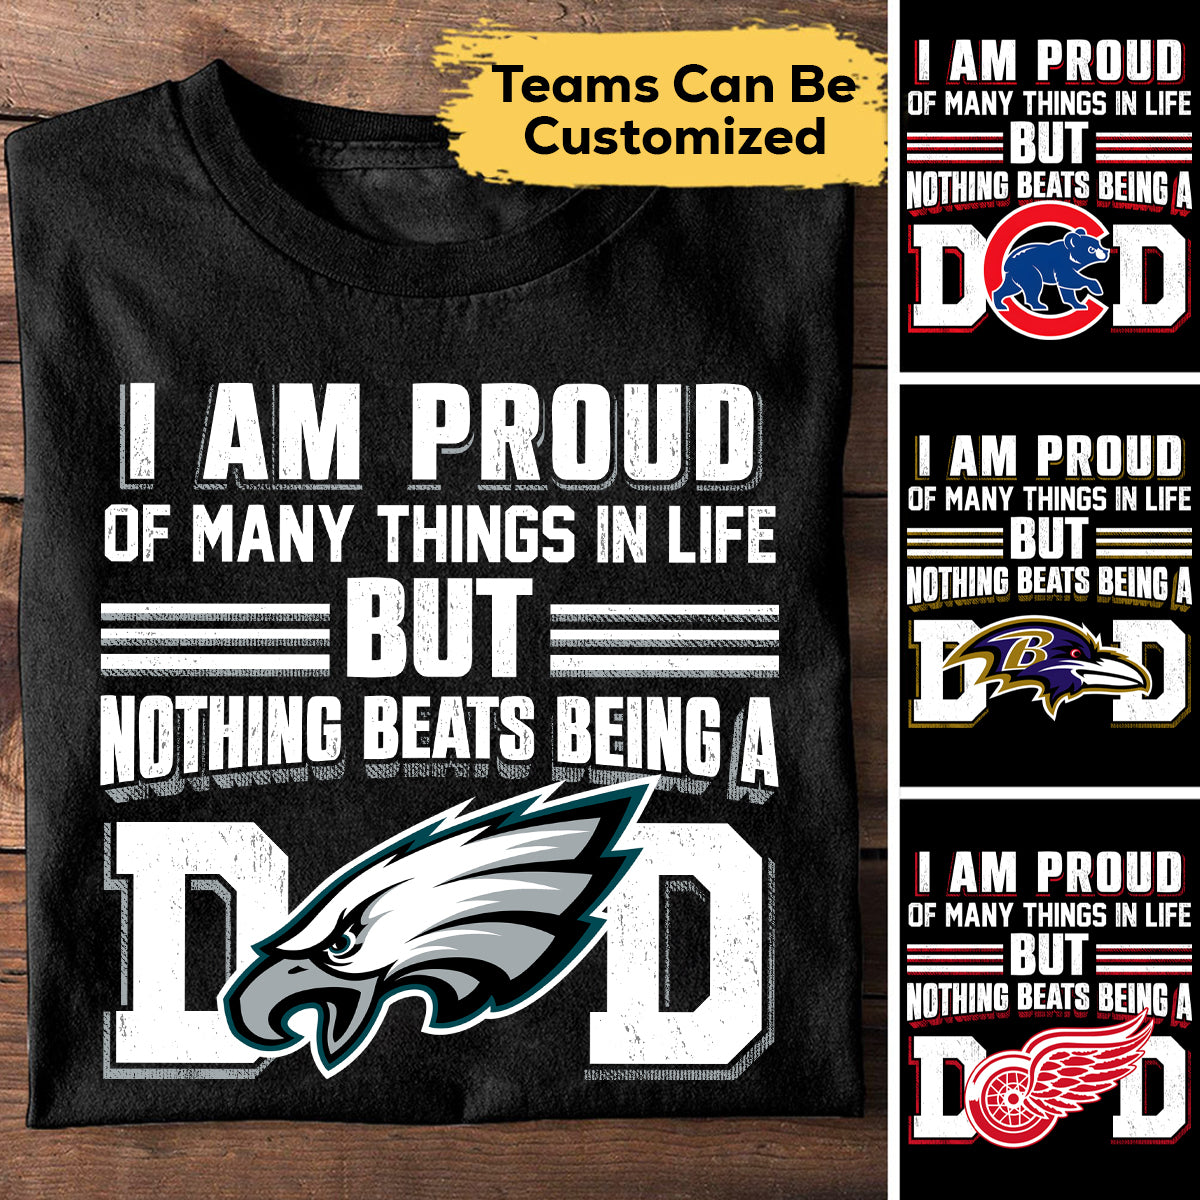 I'm A Proud Dad - Customized Shirt - Perfect gift for Father's Day